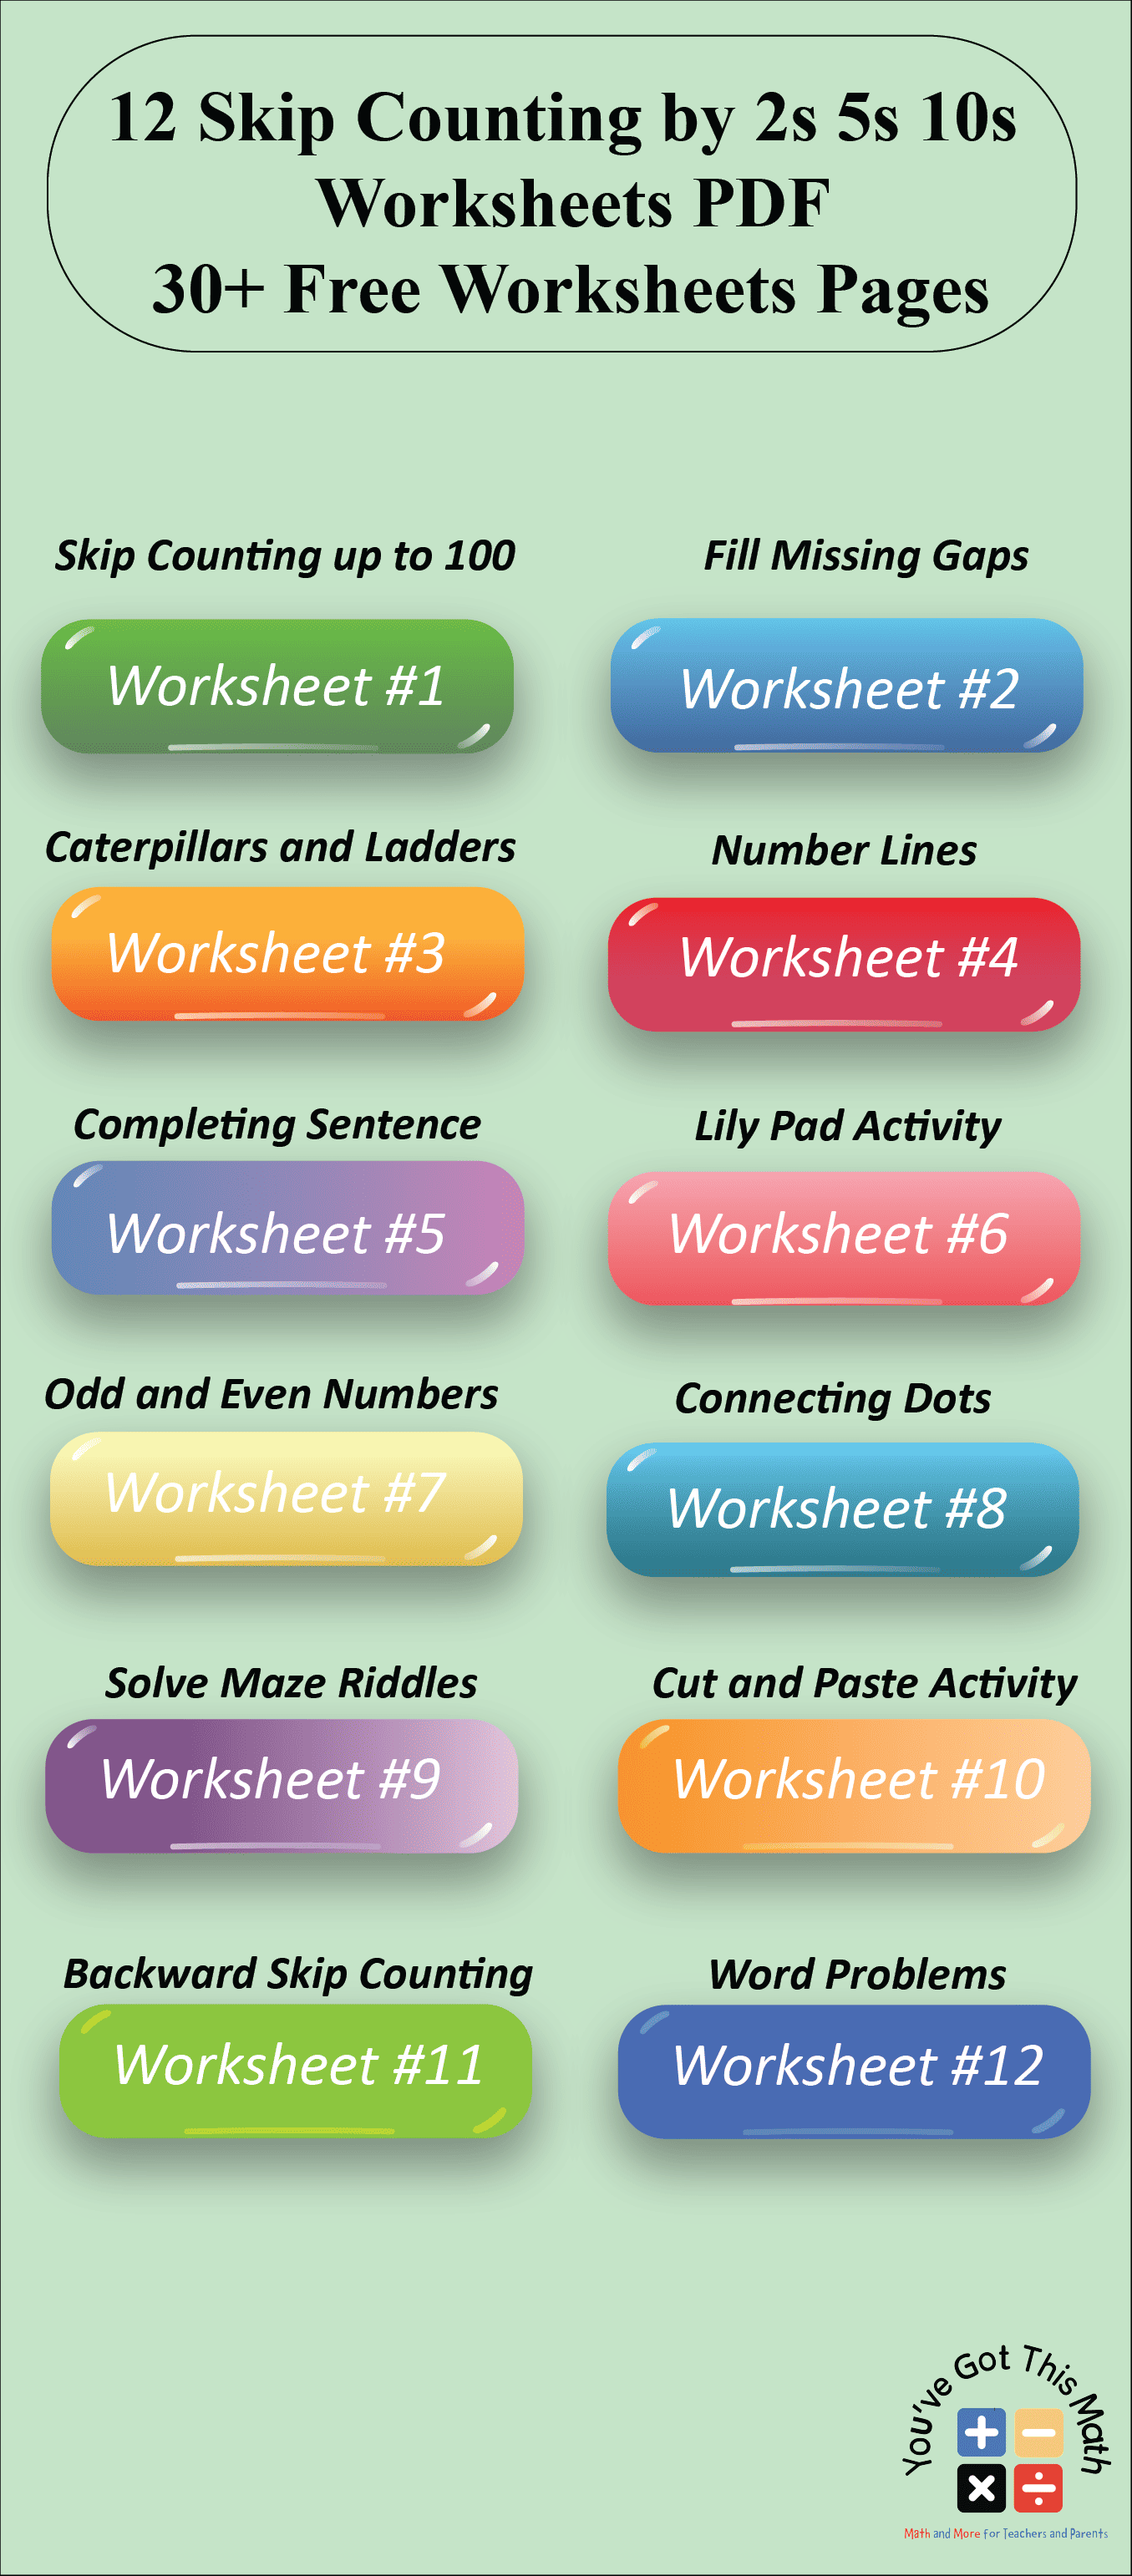 12 Skip Counting by 2s 5s 10s Worksheets PDF-01